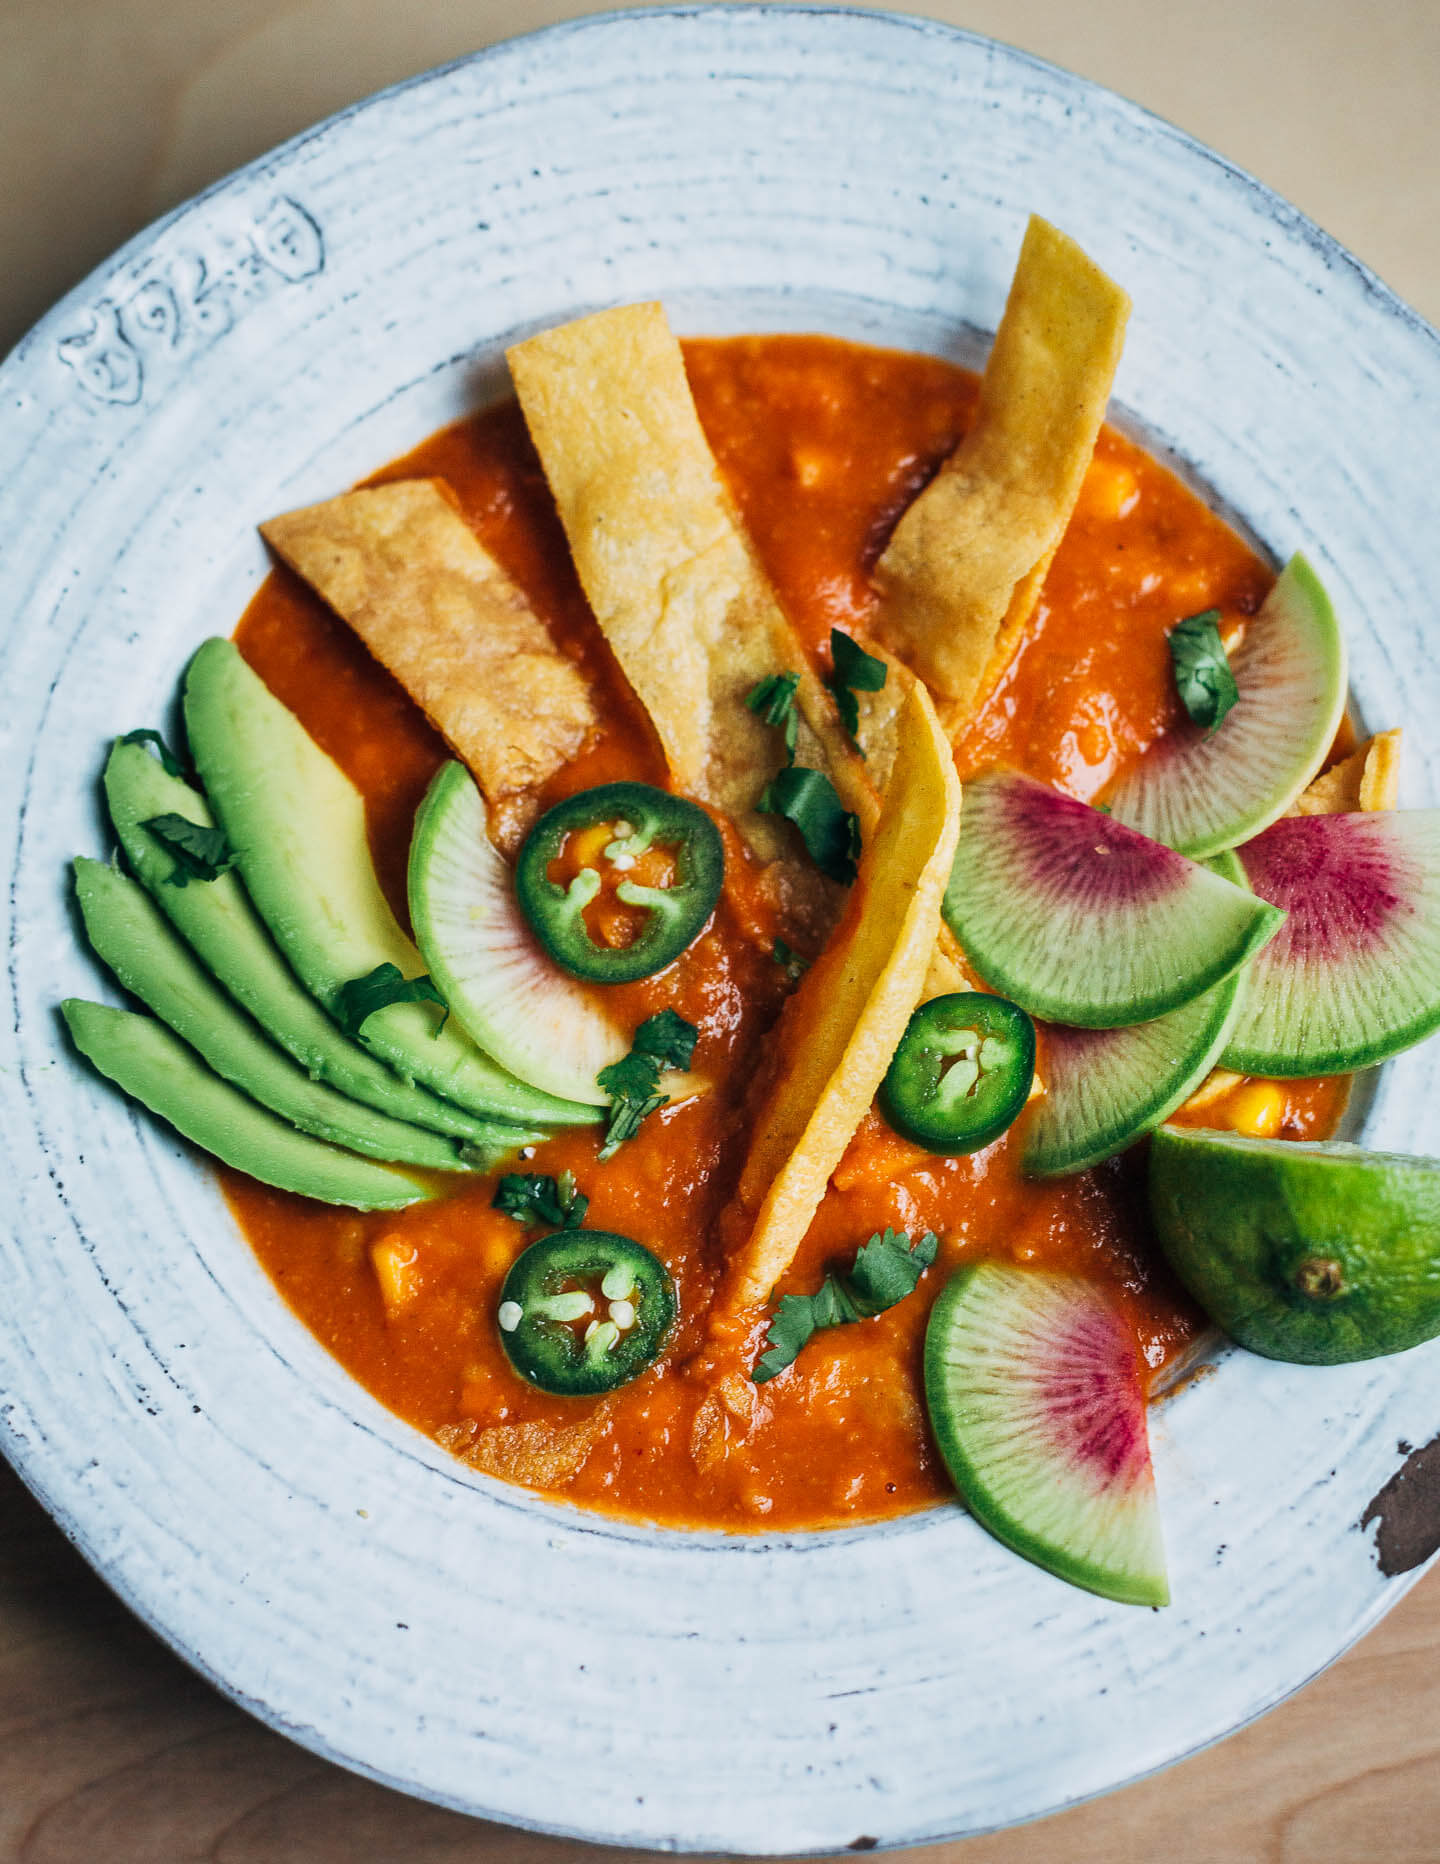 A hearty, spicy plant-based tortilla soup that's perfect for chilly winter days.